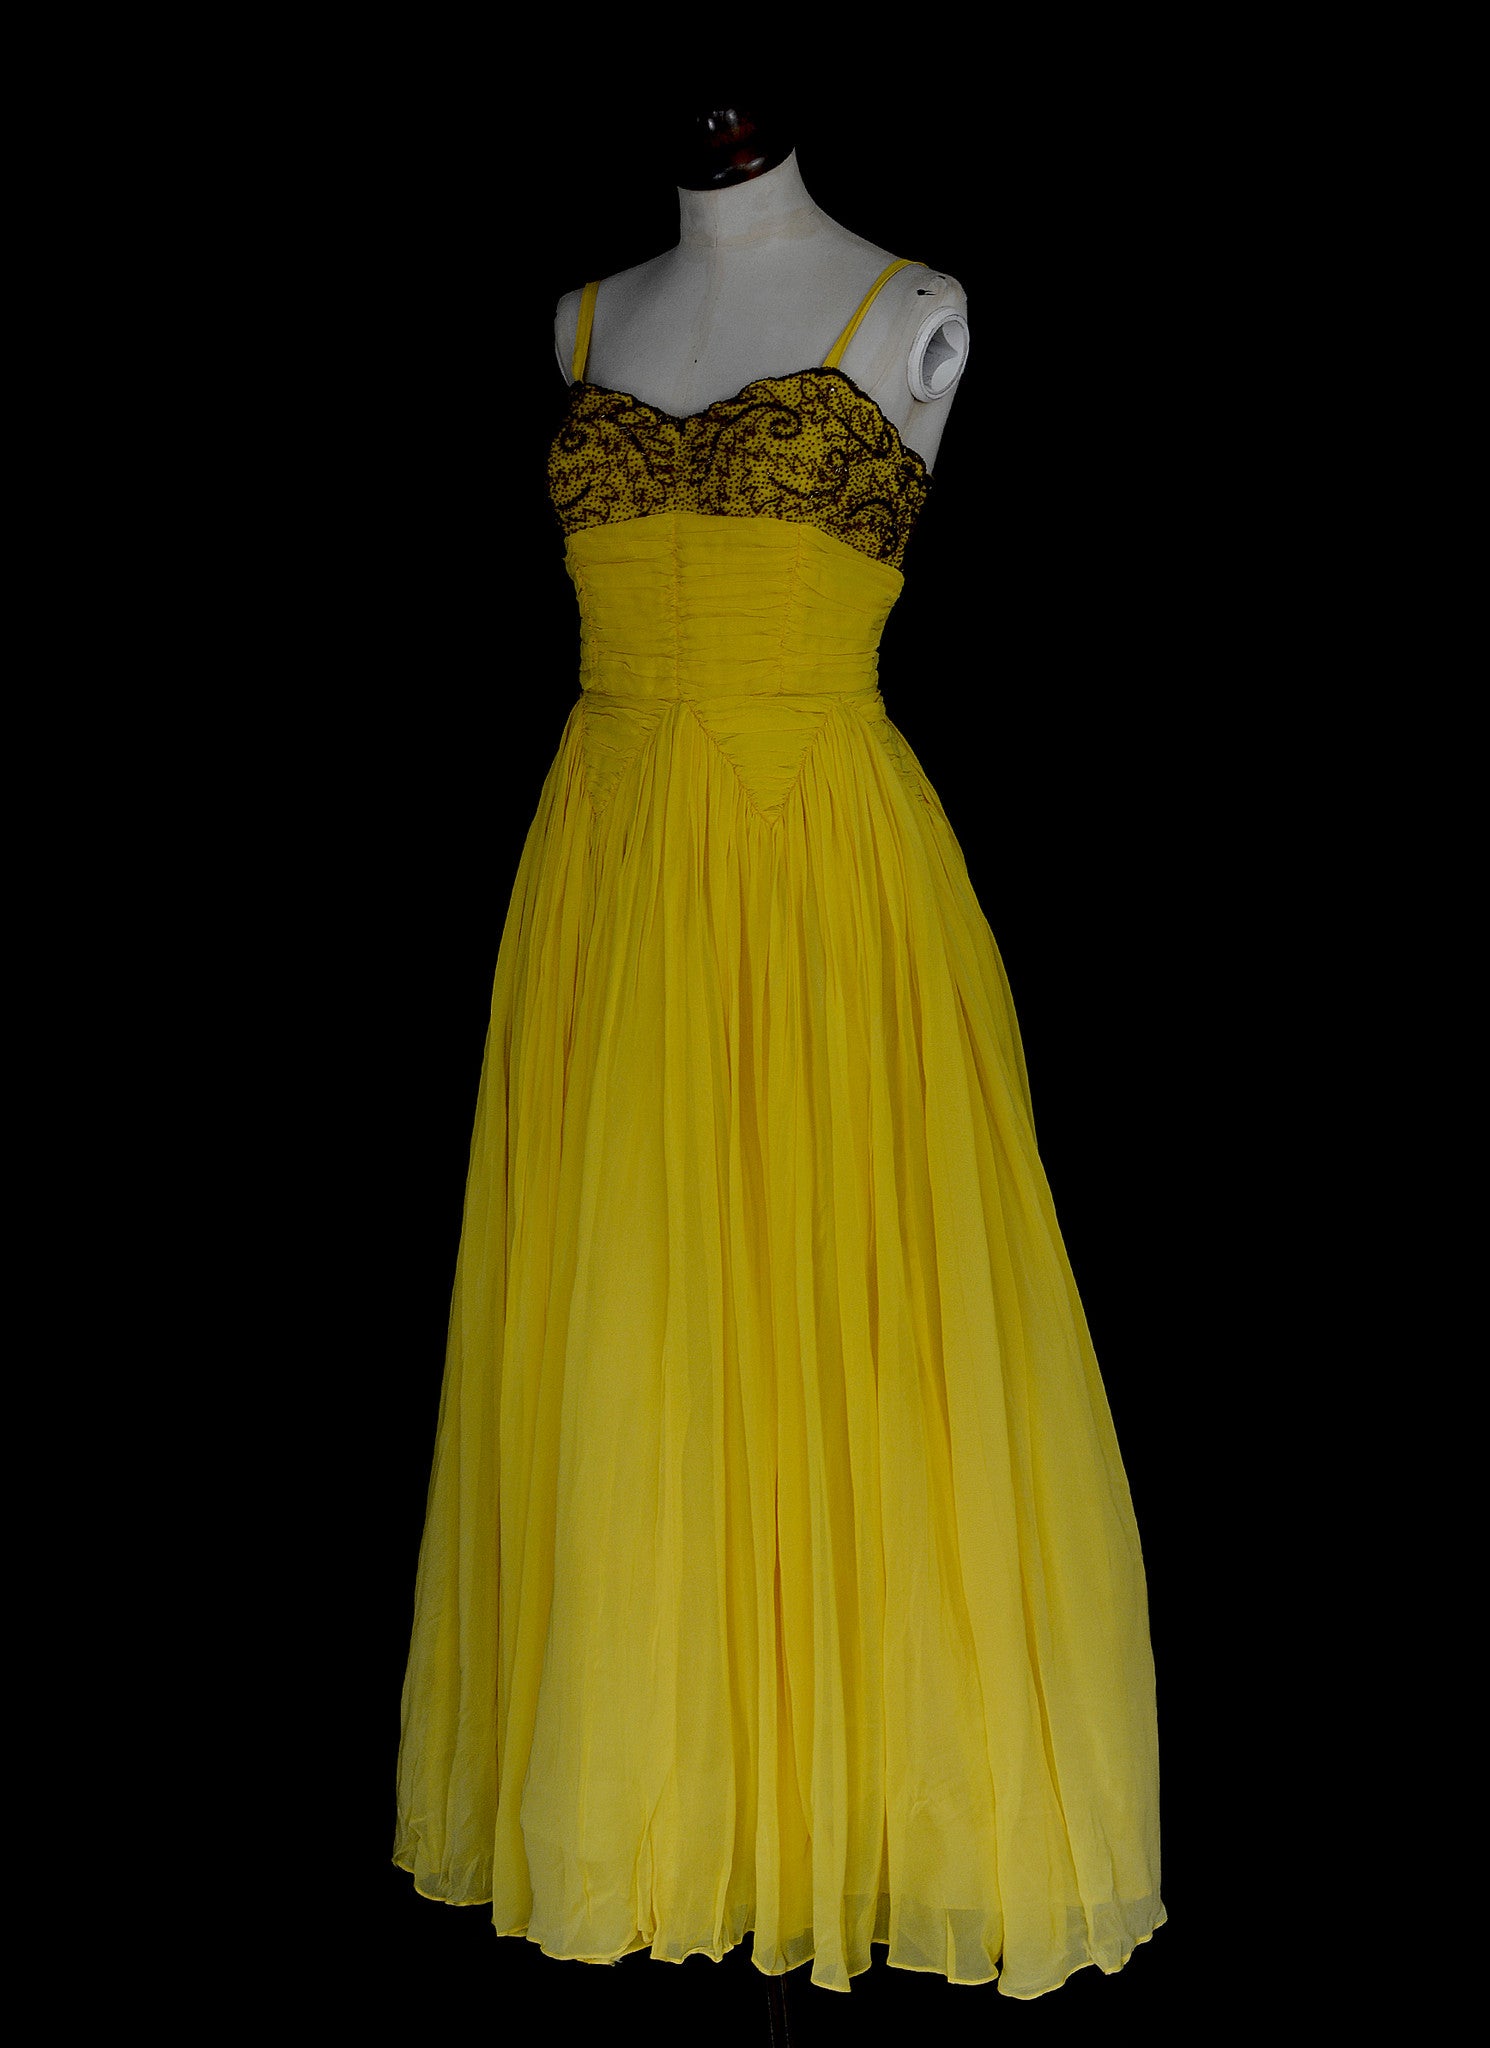 Vintage 1950s Beaded Yellow Chiffon Gown